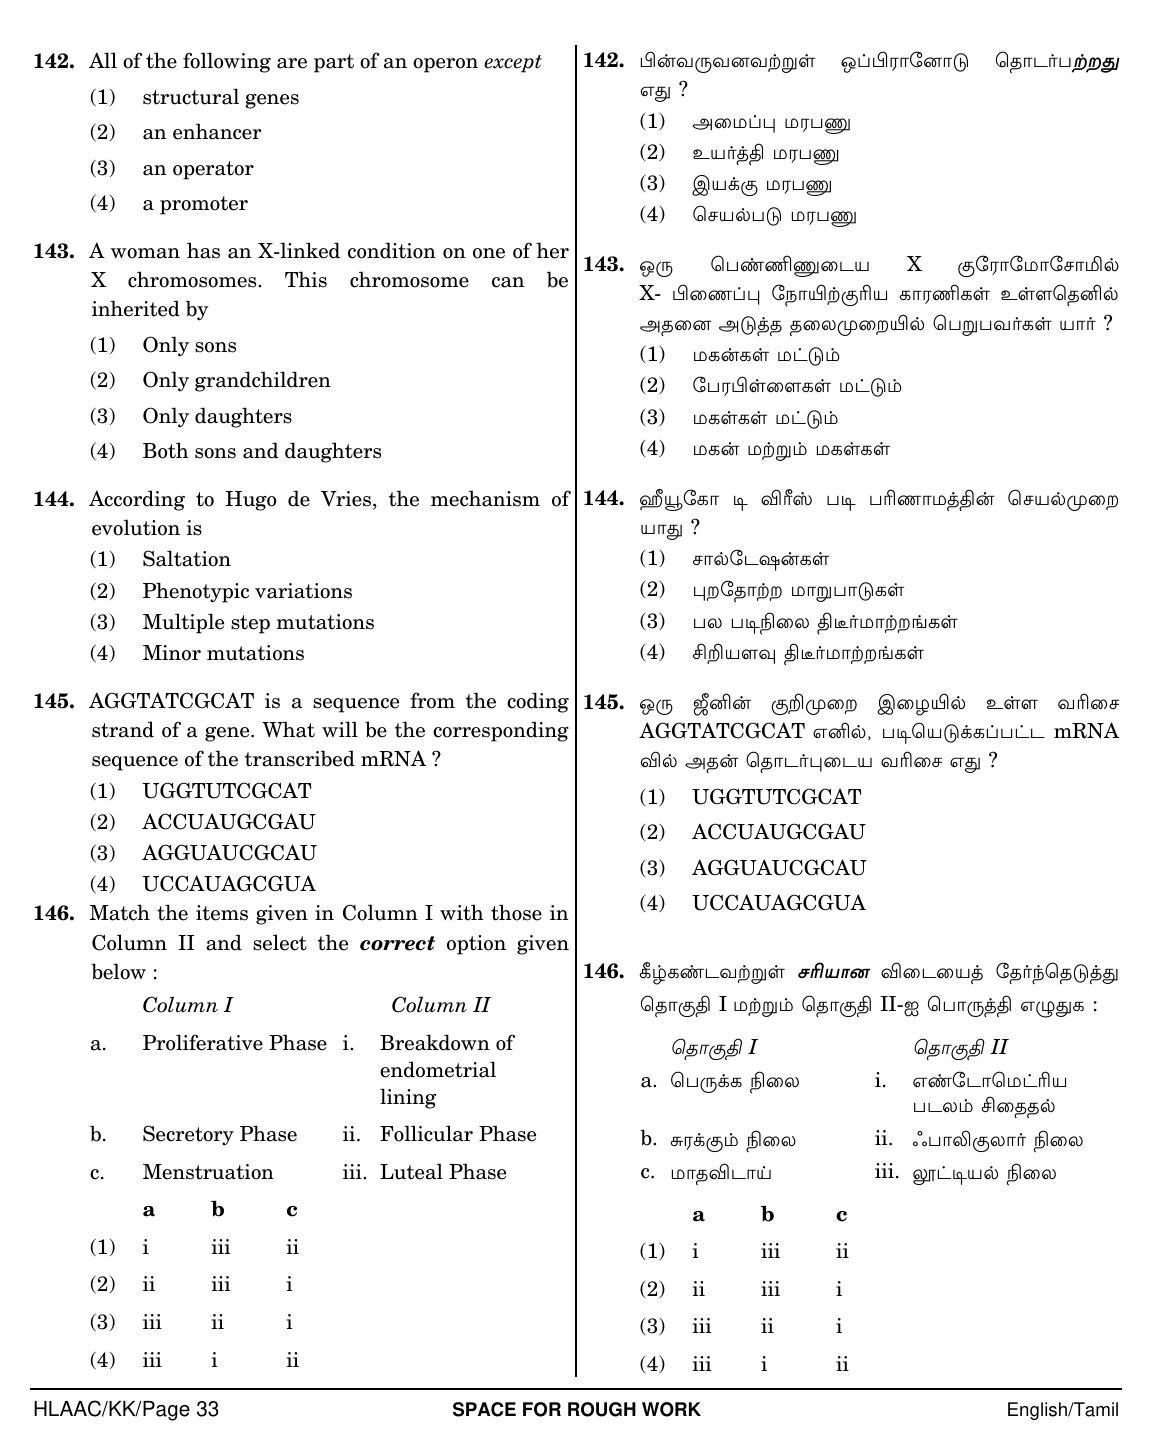 NEET Tamil KK 2018 Question Paper - Page 33